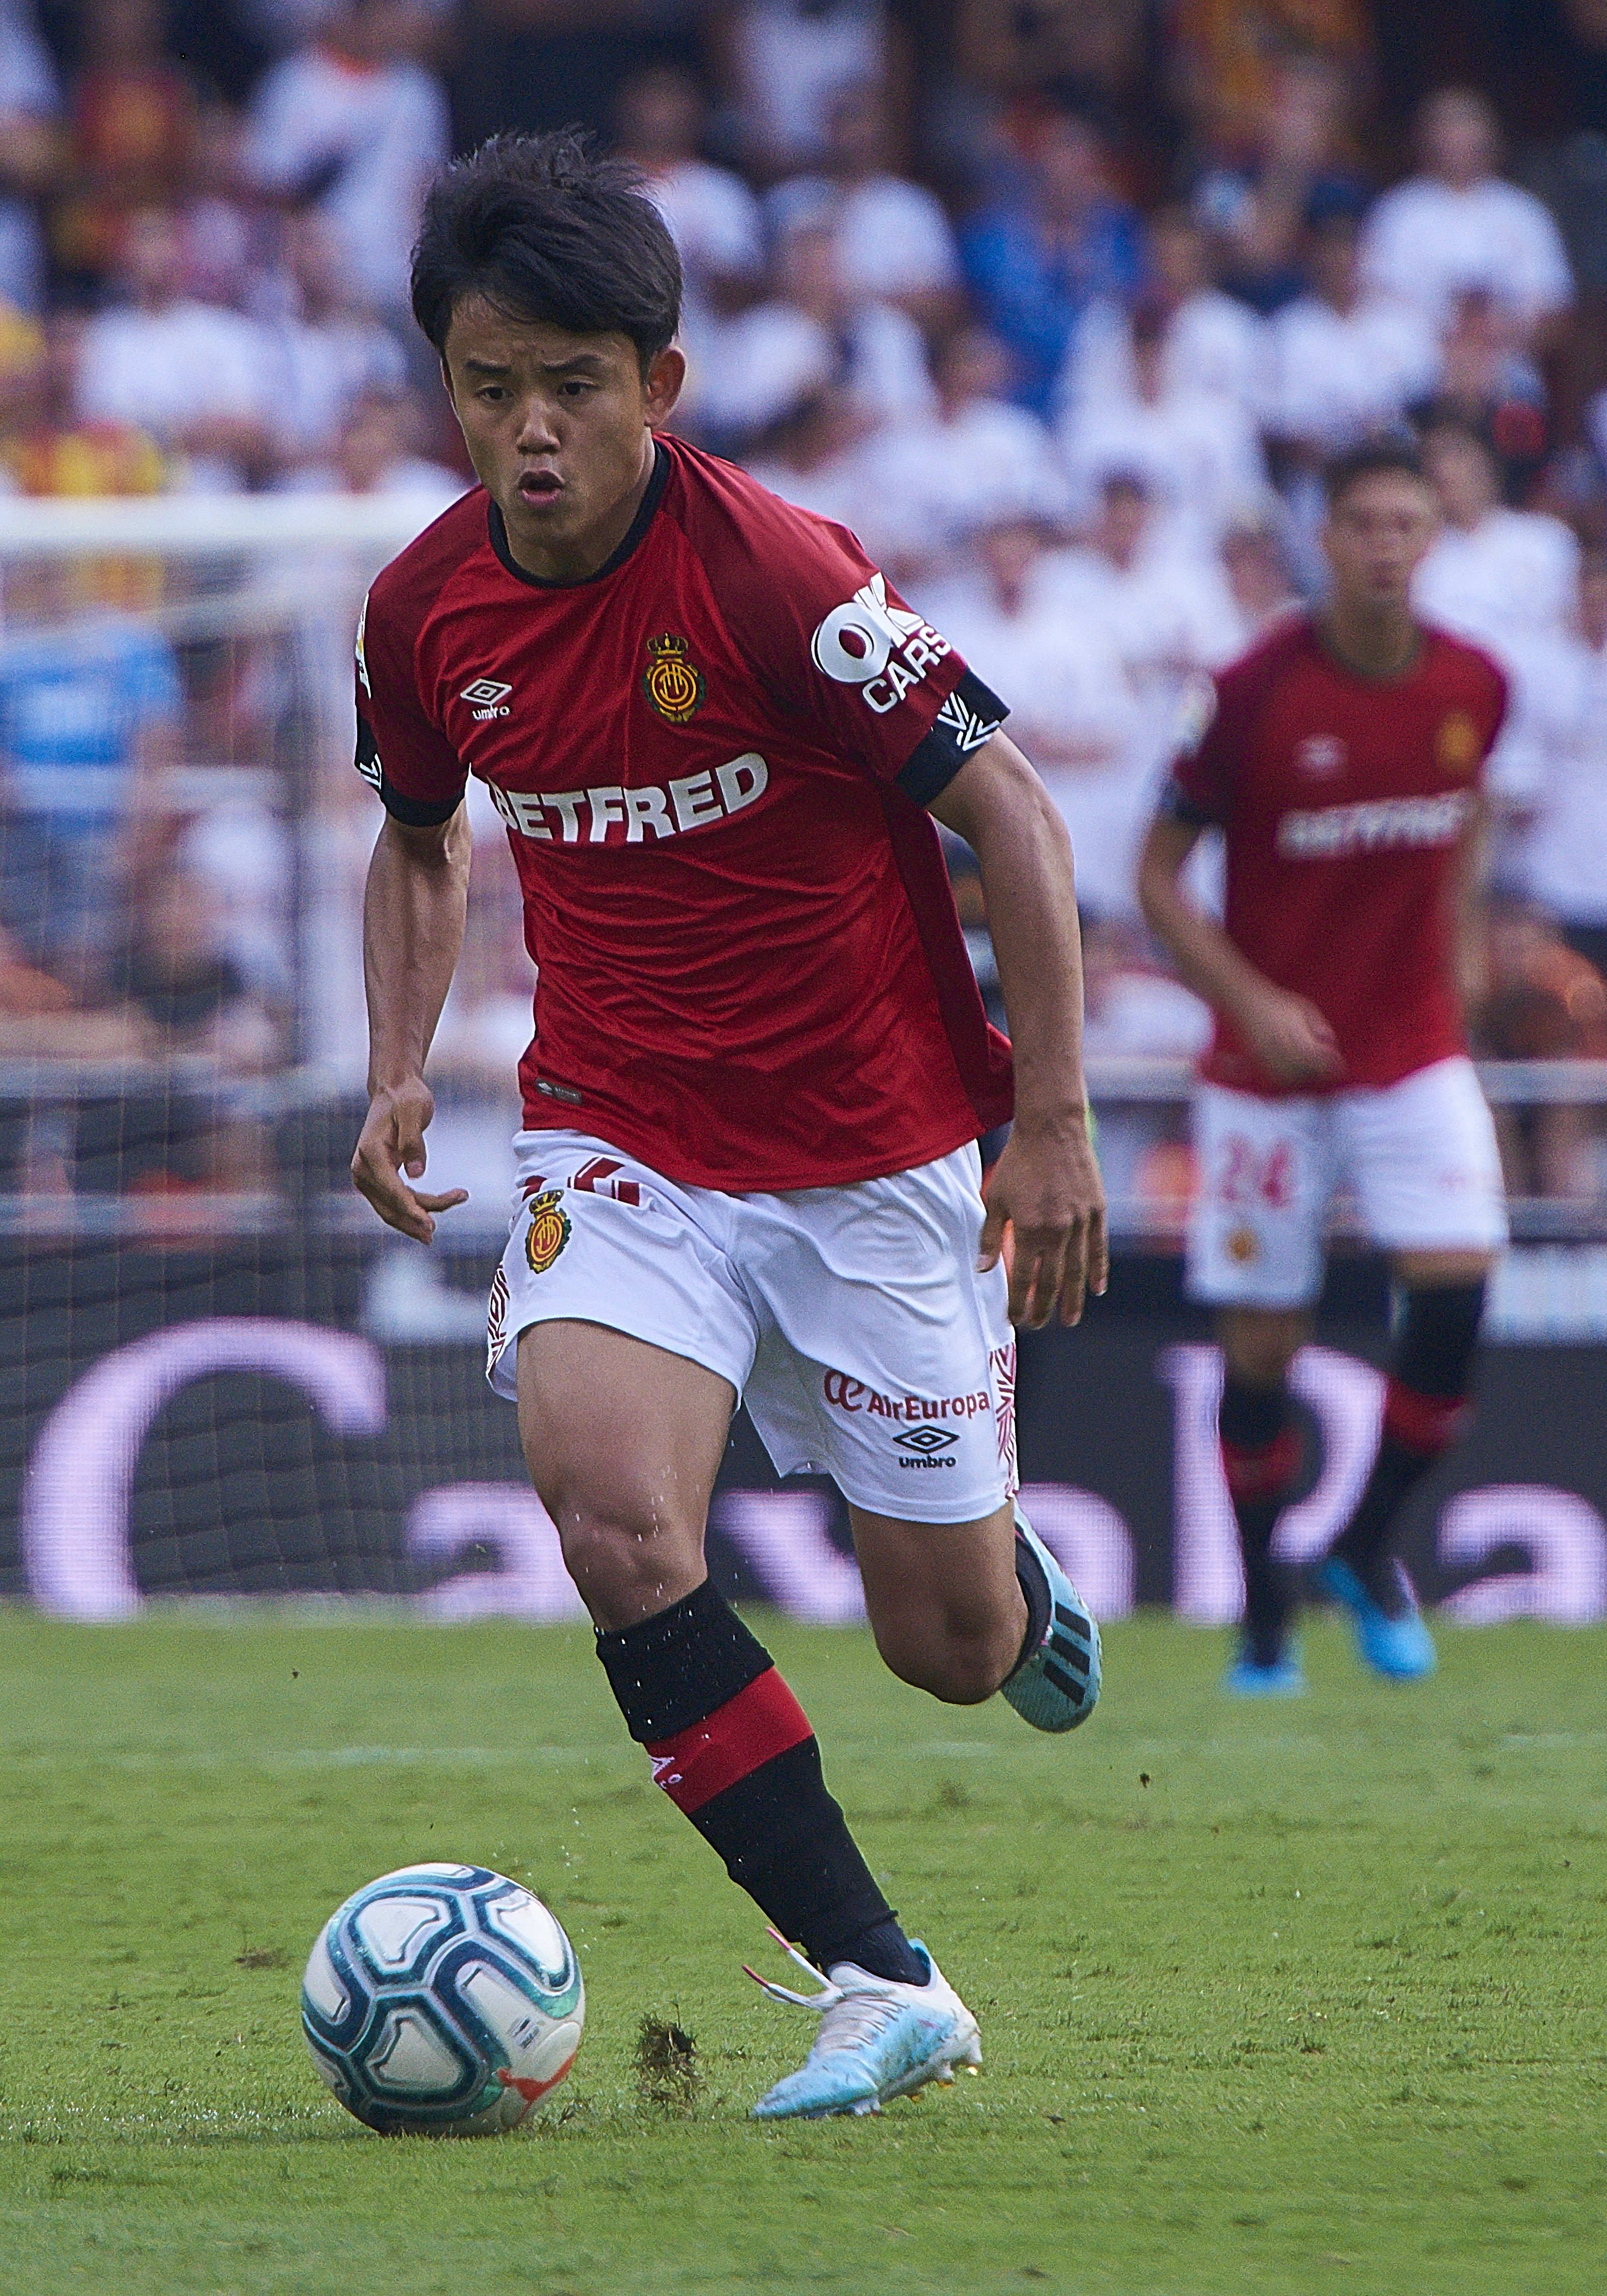 Takefusa Kubo Given Man Of The Match After Brilliant 27 Minutes for Mallorca